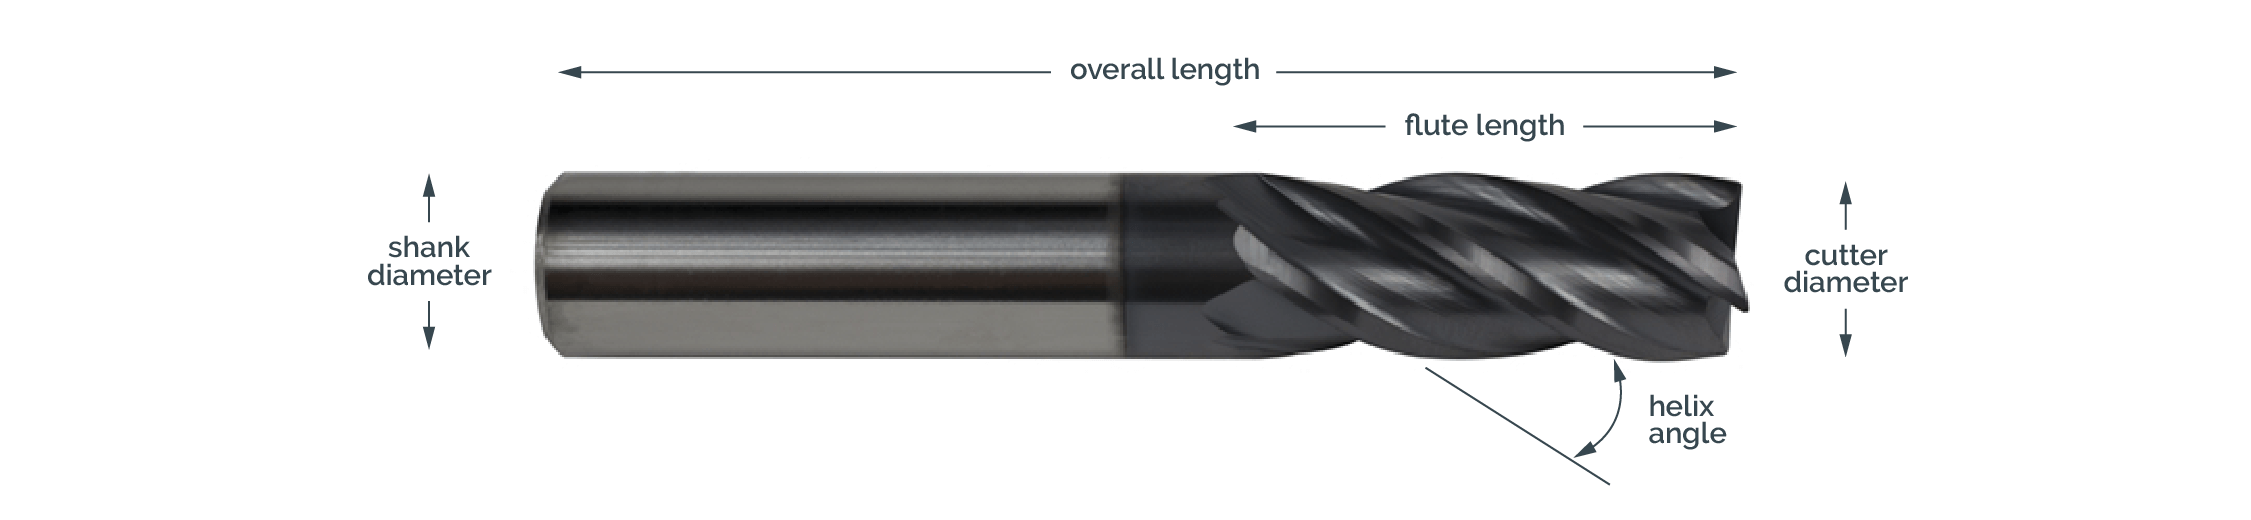 30° Helix Carbide Corner Radius End Mill 13/16 in Length of Cut Morse Cutting Tools 95429 5/16 in Dia 5/16 in Shank 2 Flute 